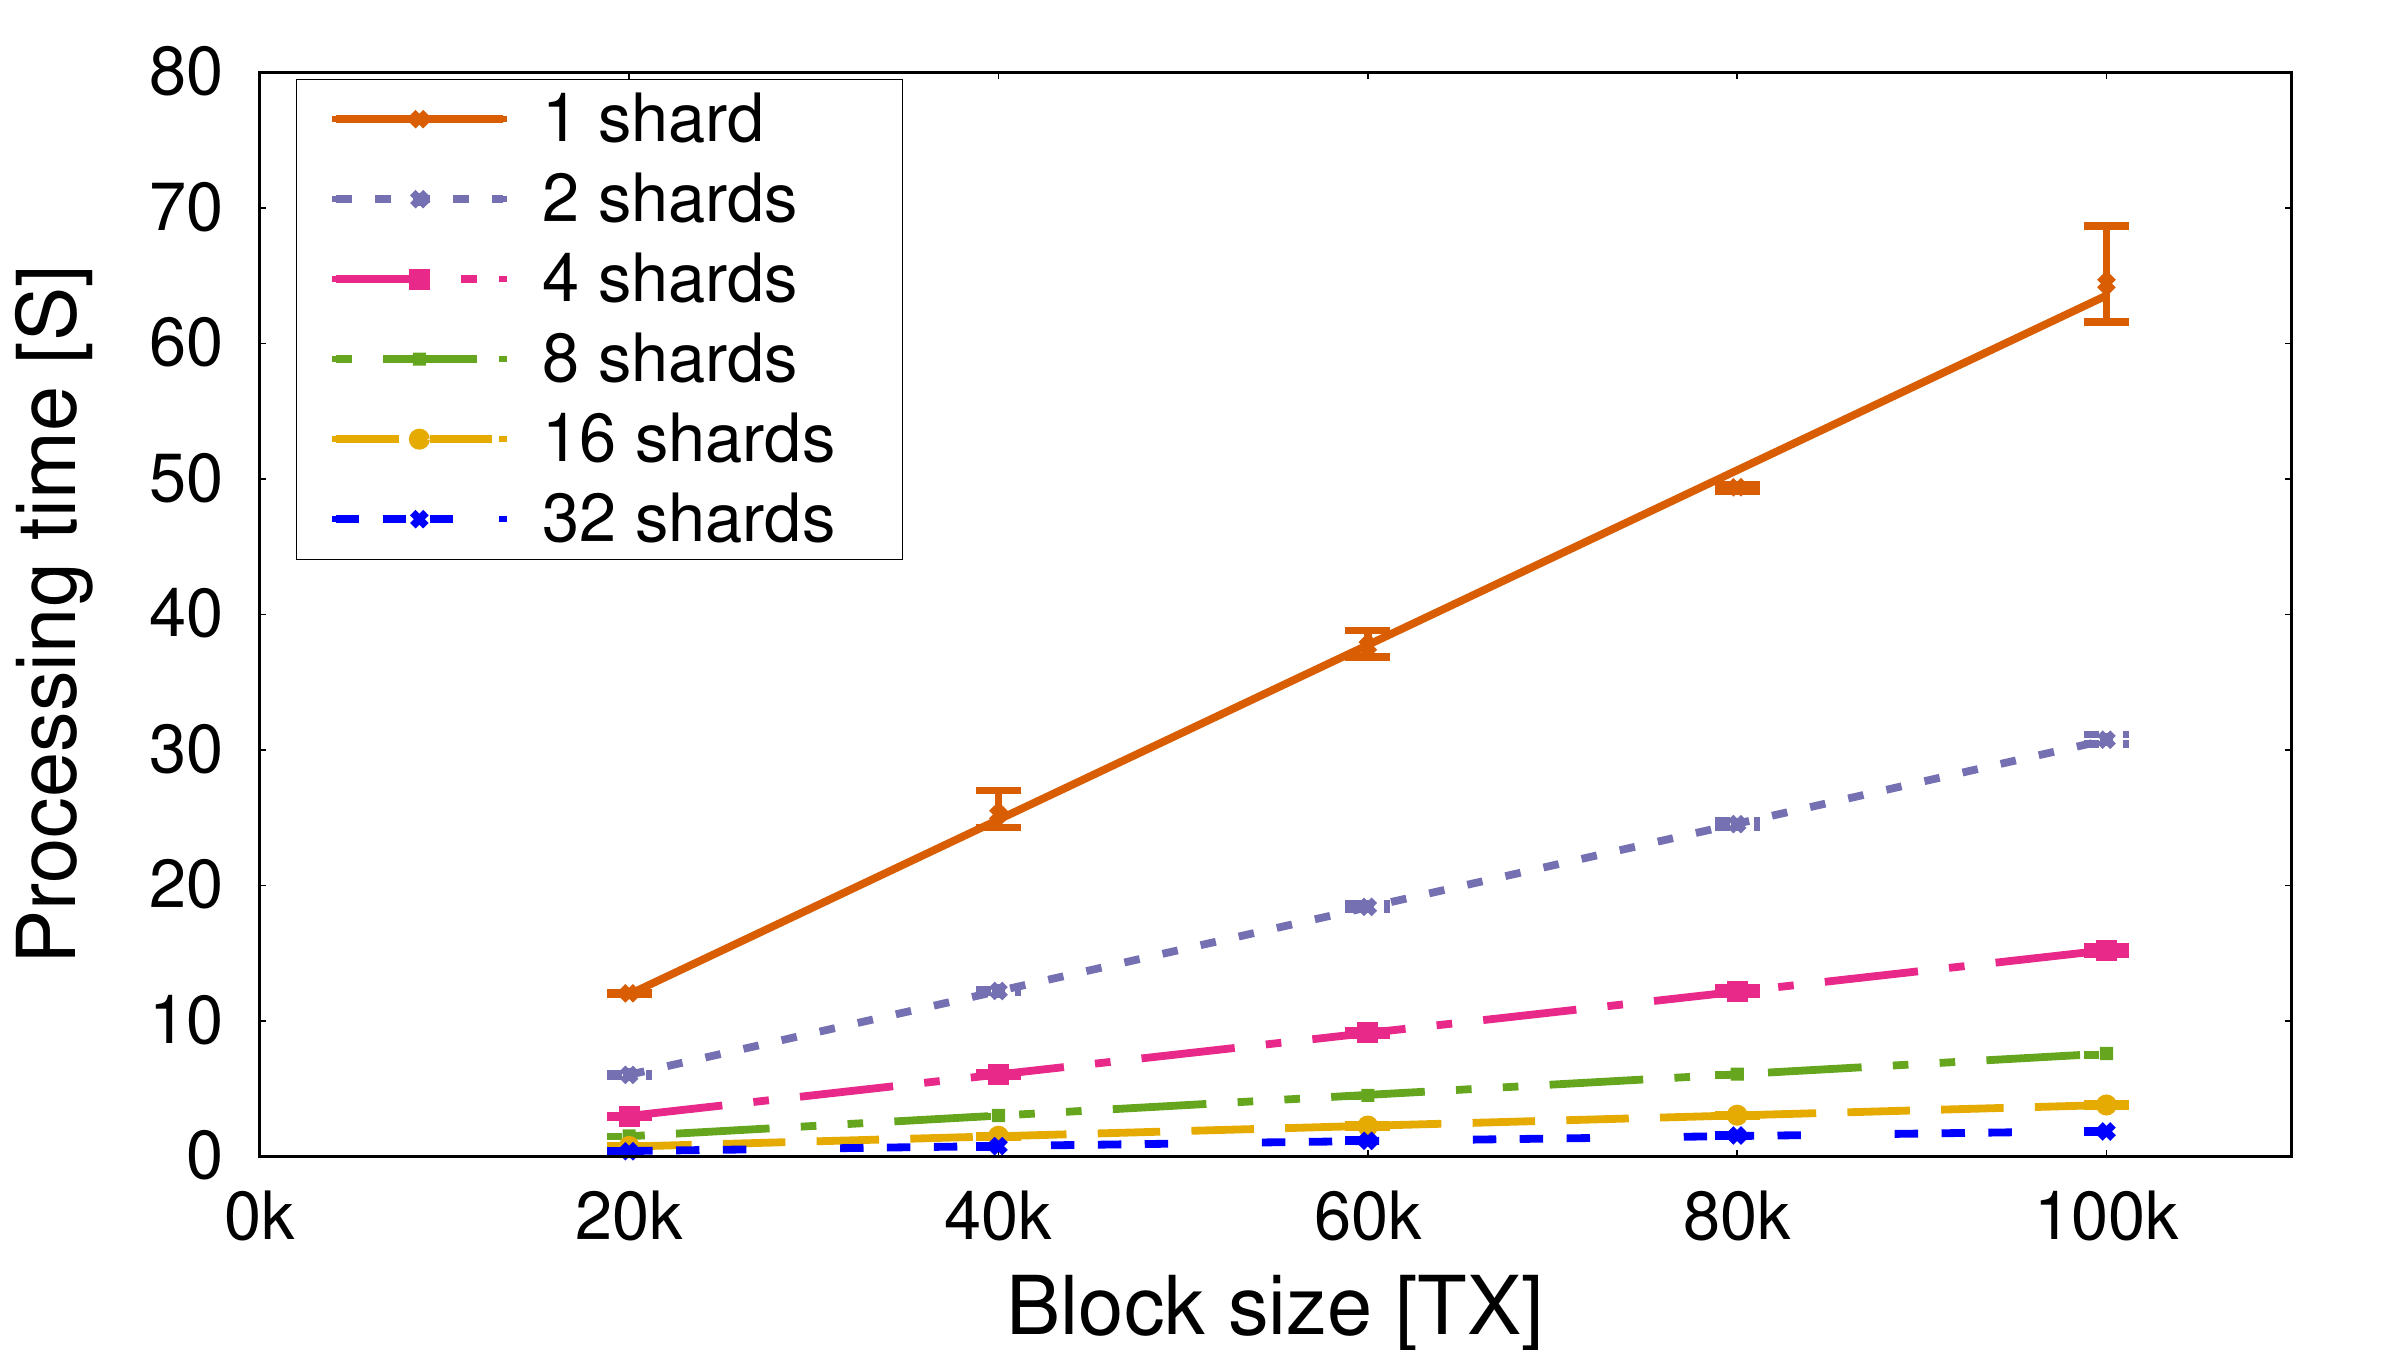 https://hackingdistributed.com/images/2019-bitcoin/varying_shards-1.png